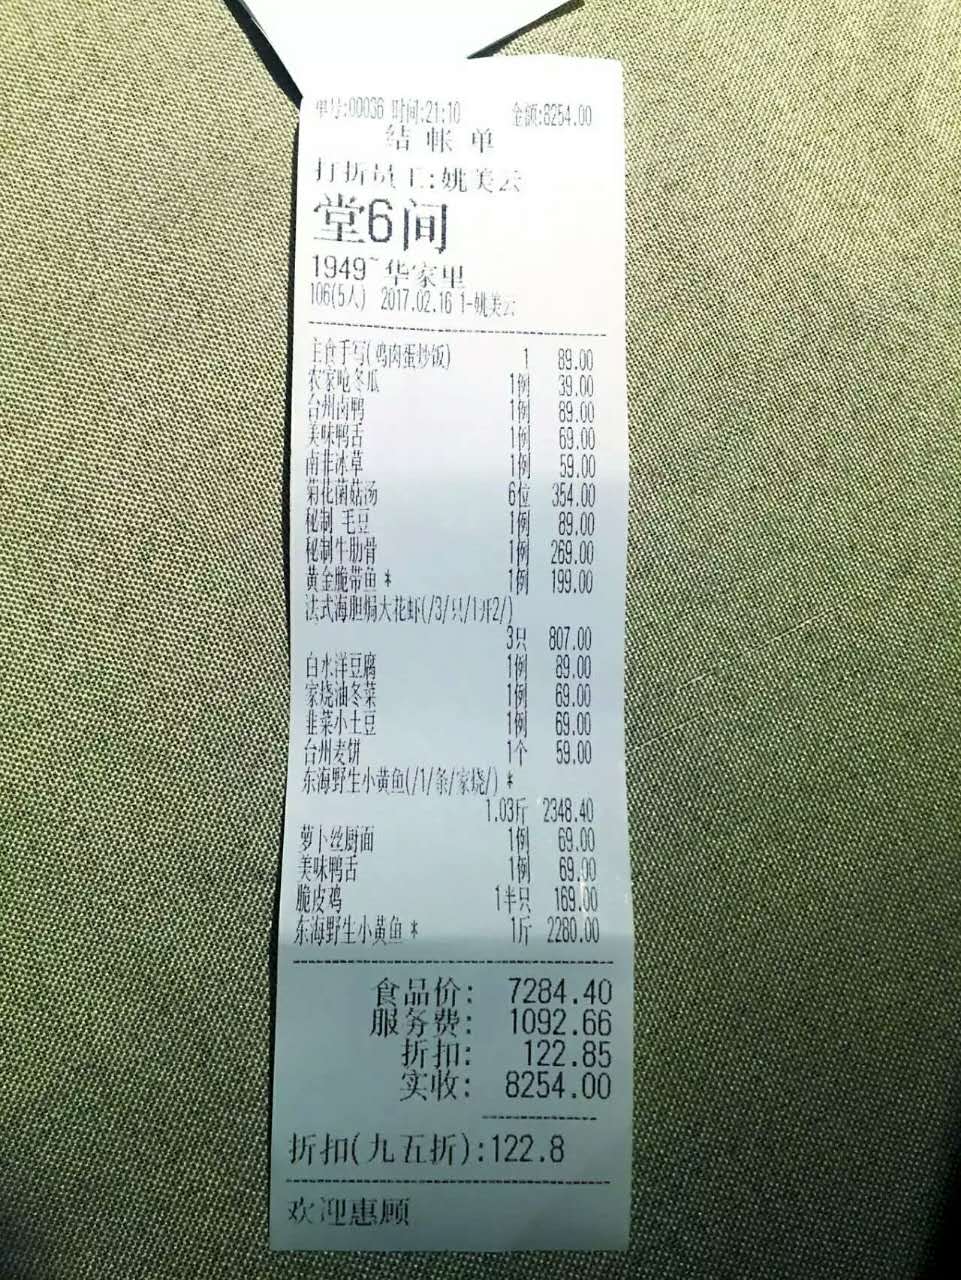 Receipt for the yellow croaker meal at an OCT Harbour restaurant